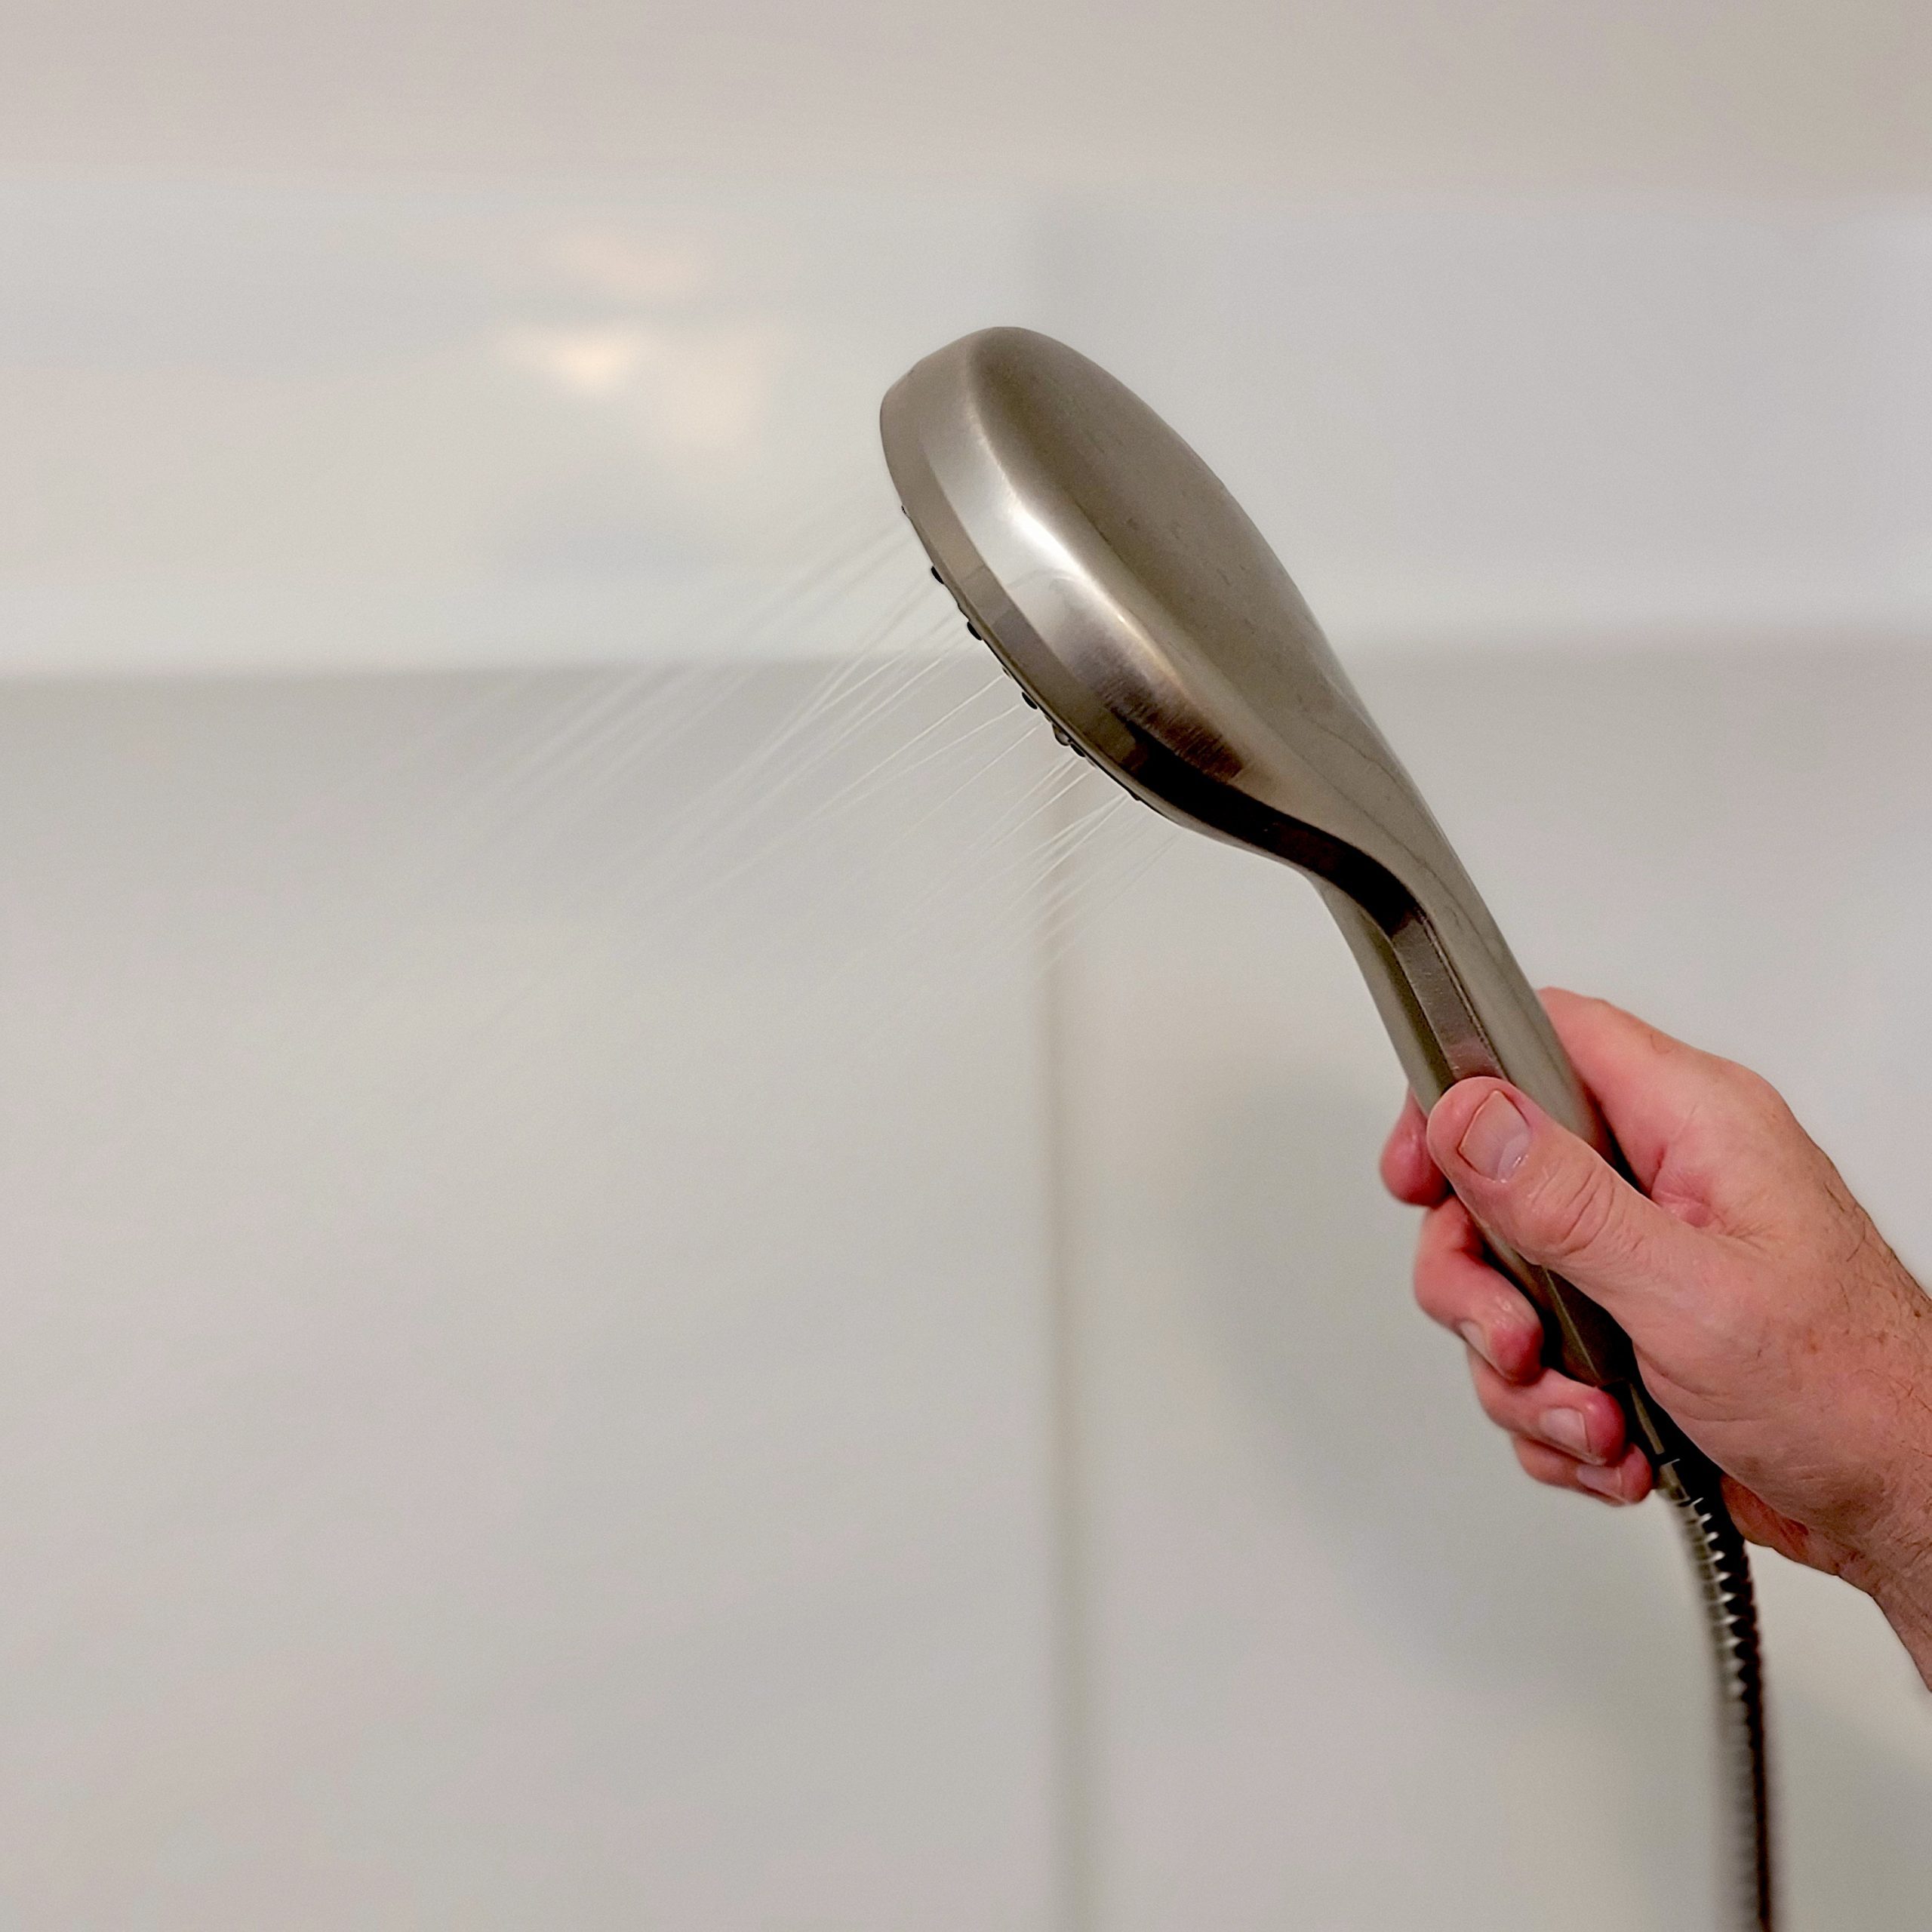 rinsing the shower walls with shower head